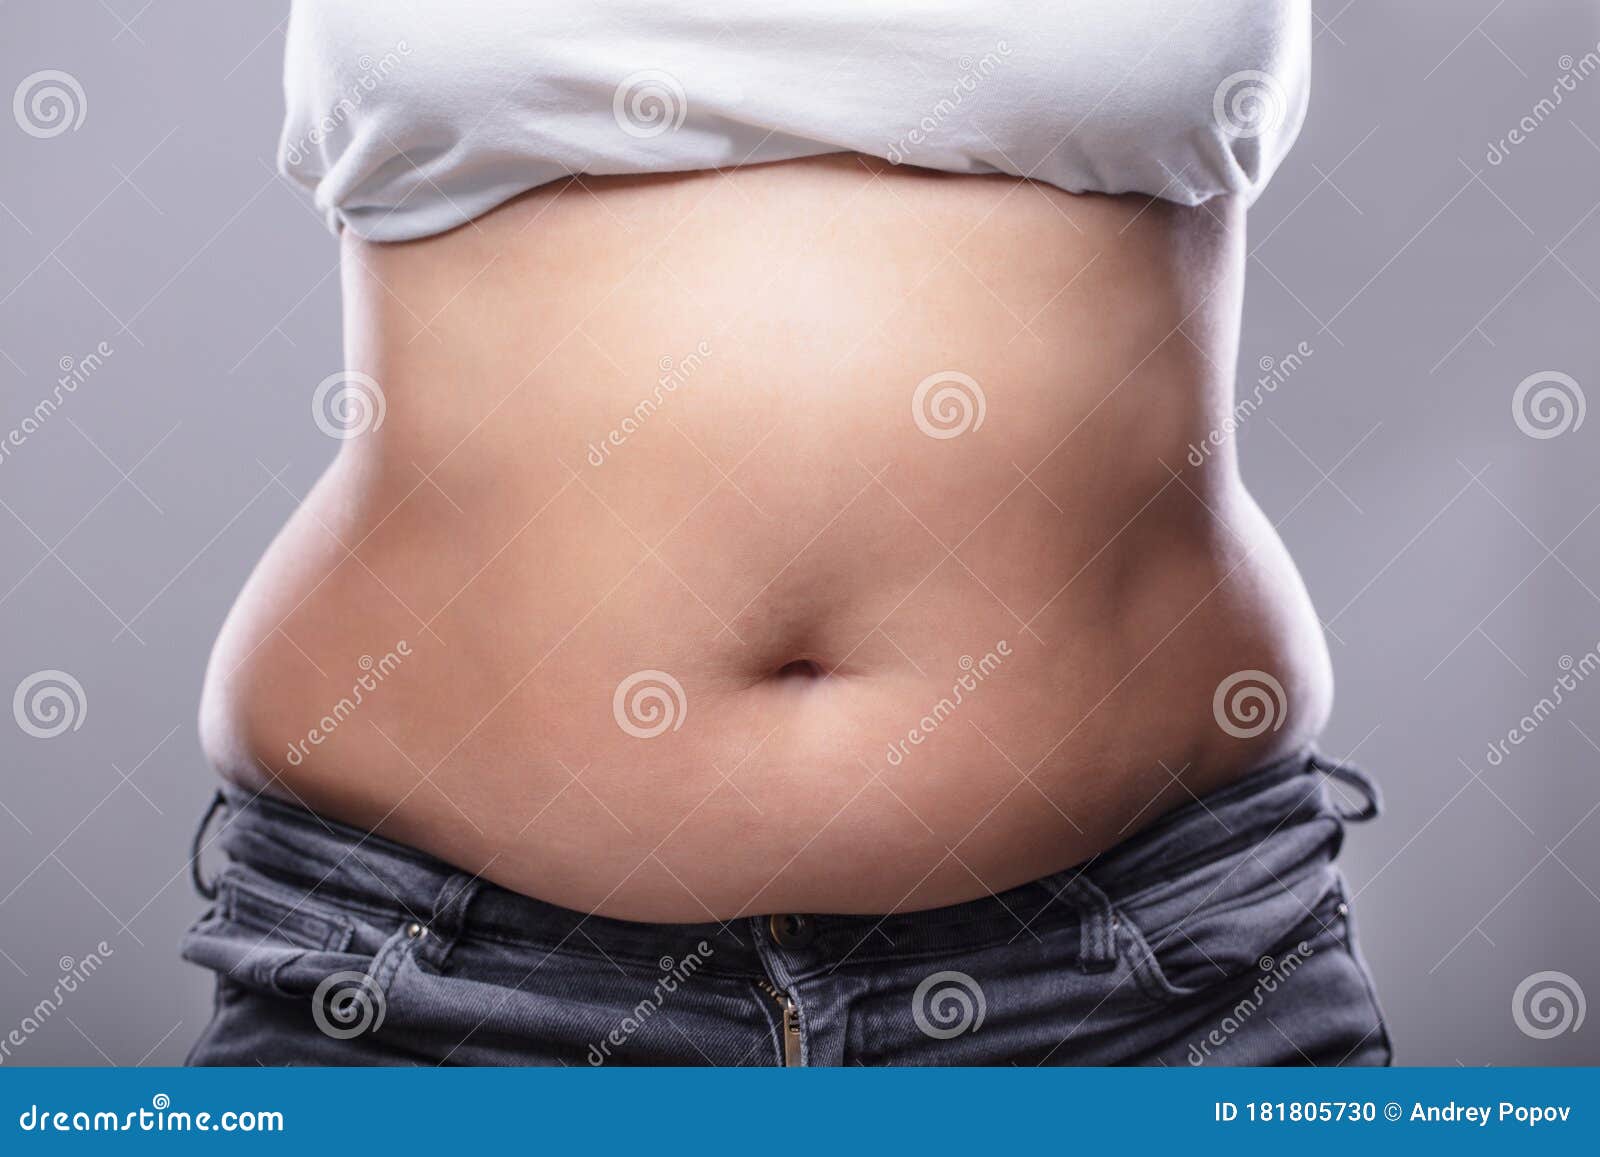 Woman With Excessive Belly Fat Stock Photo Image Of